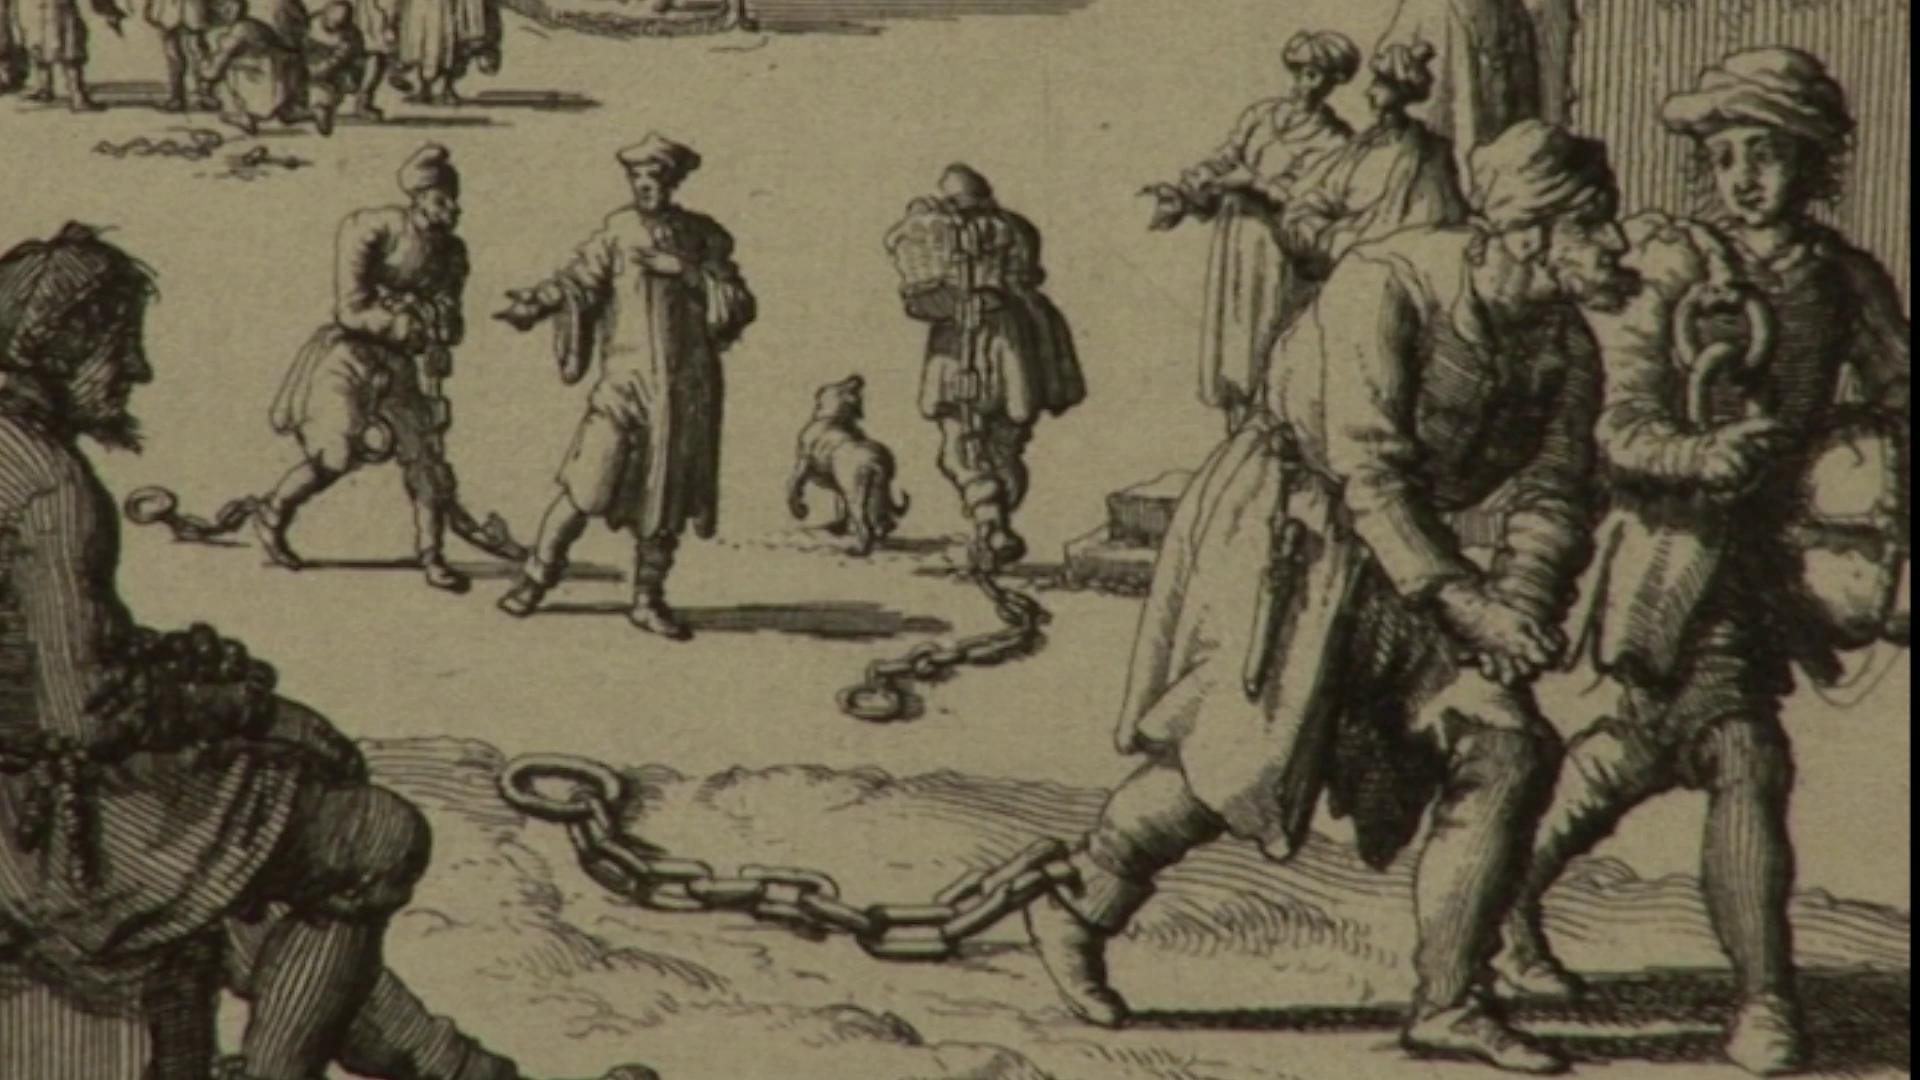 Barbary piracy that enslaved thousands 'culturally erased' - BBC